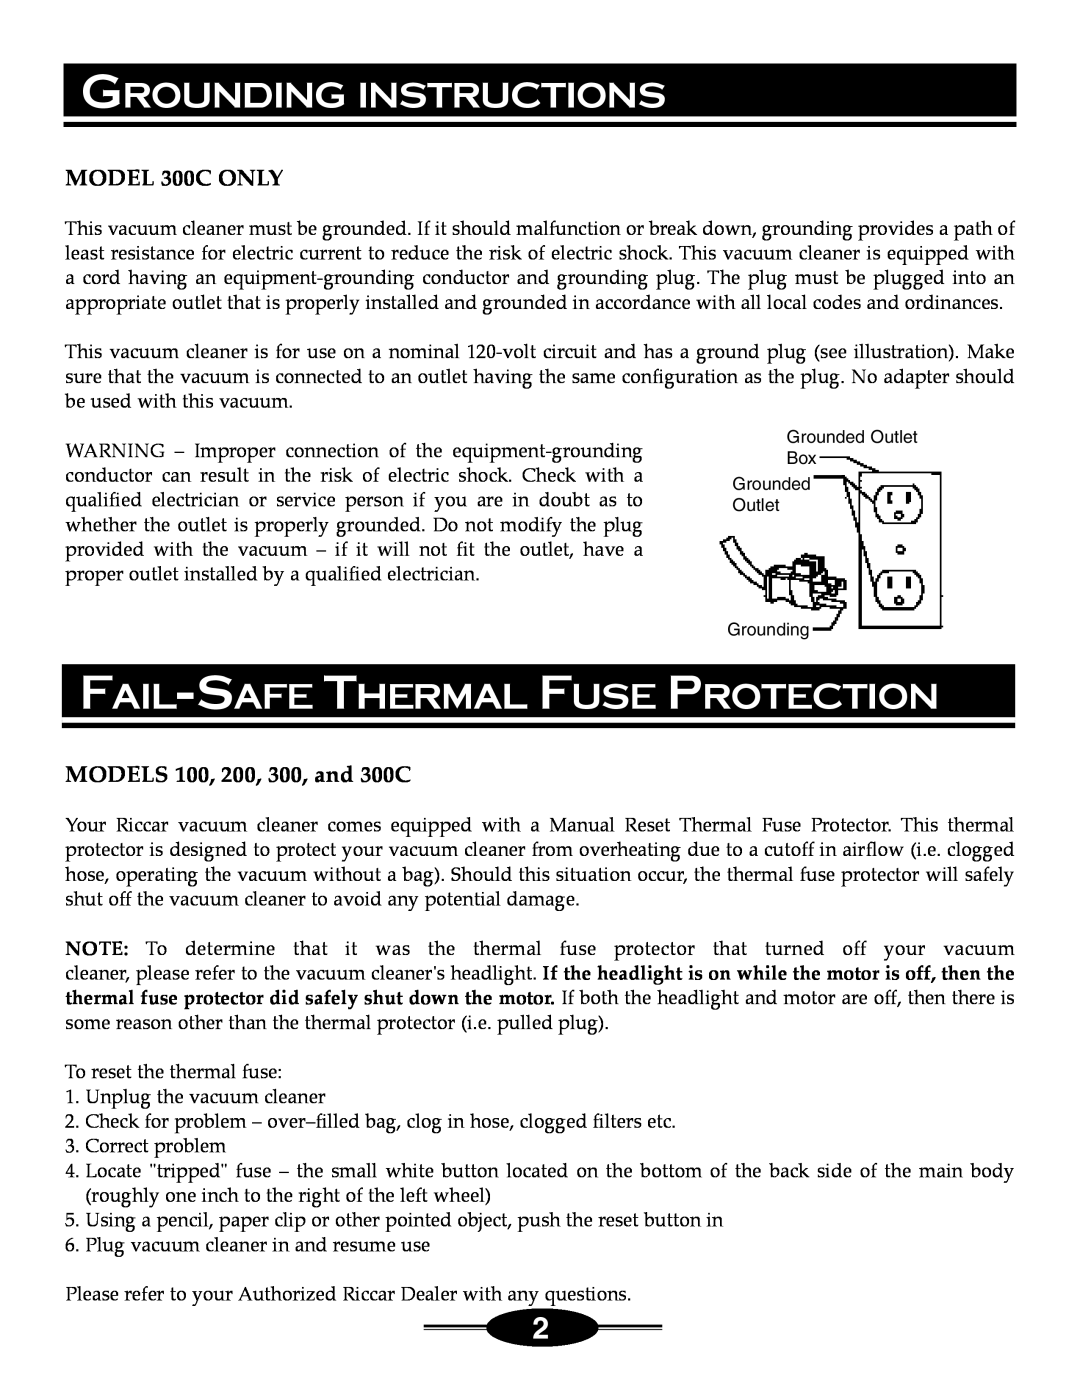 Riccar 4000 Grounding Instructions, Fail-Safe Thermal Fuse Protection, MODEL 300C ONLY, MODELS 100, 200, 300, and 300C 